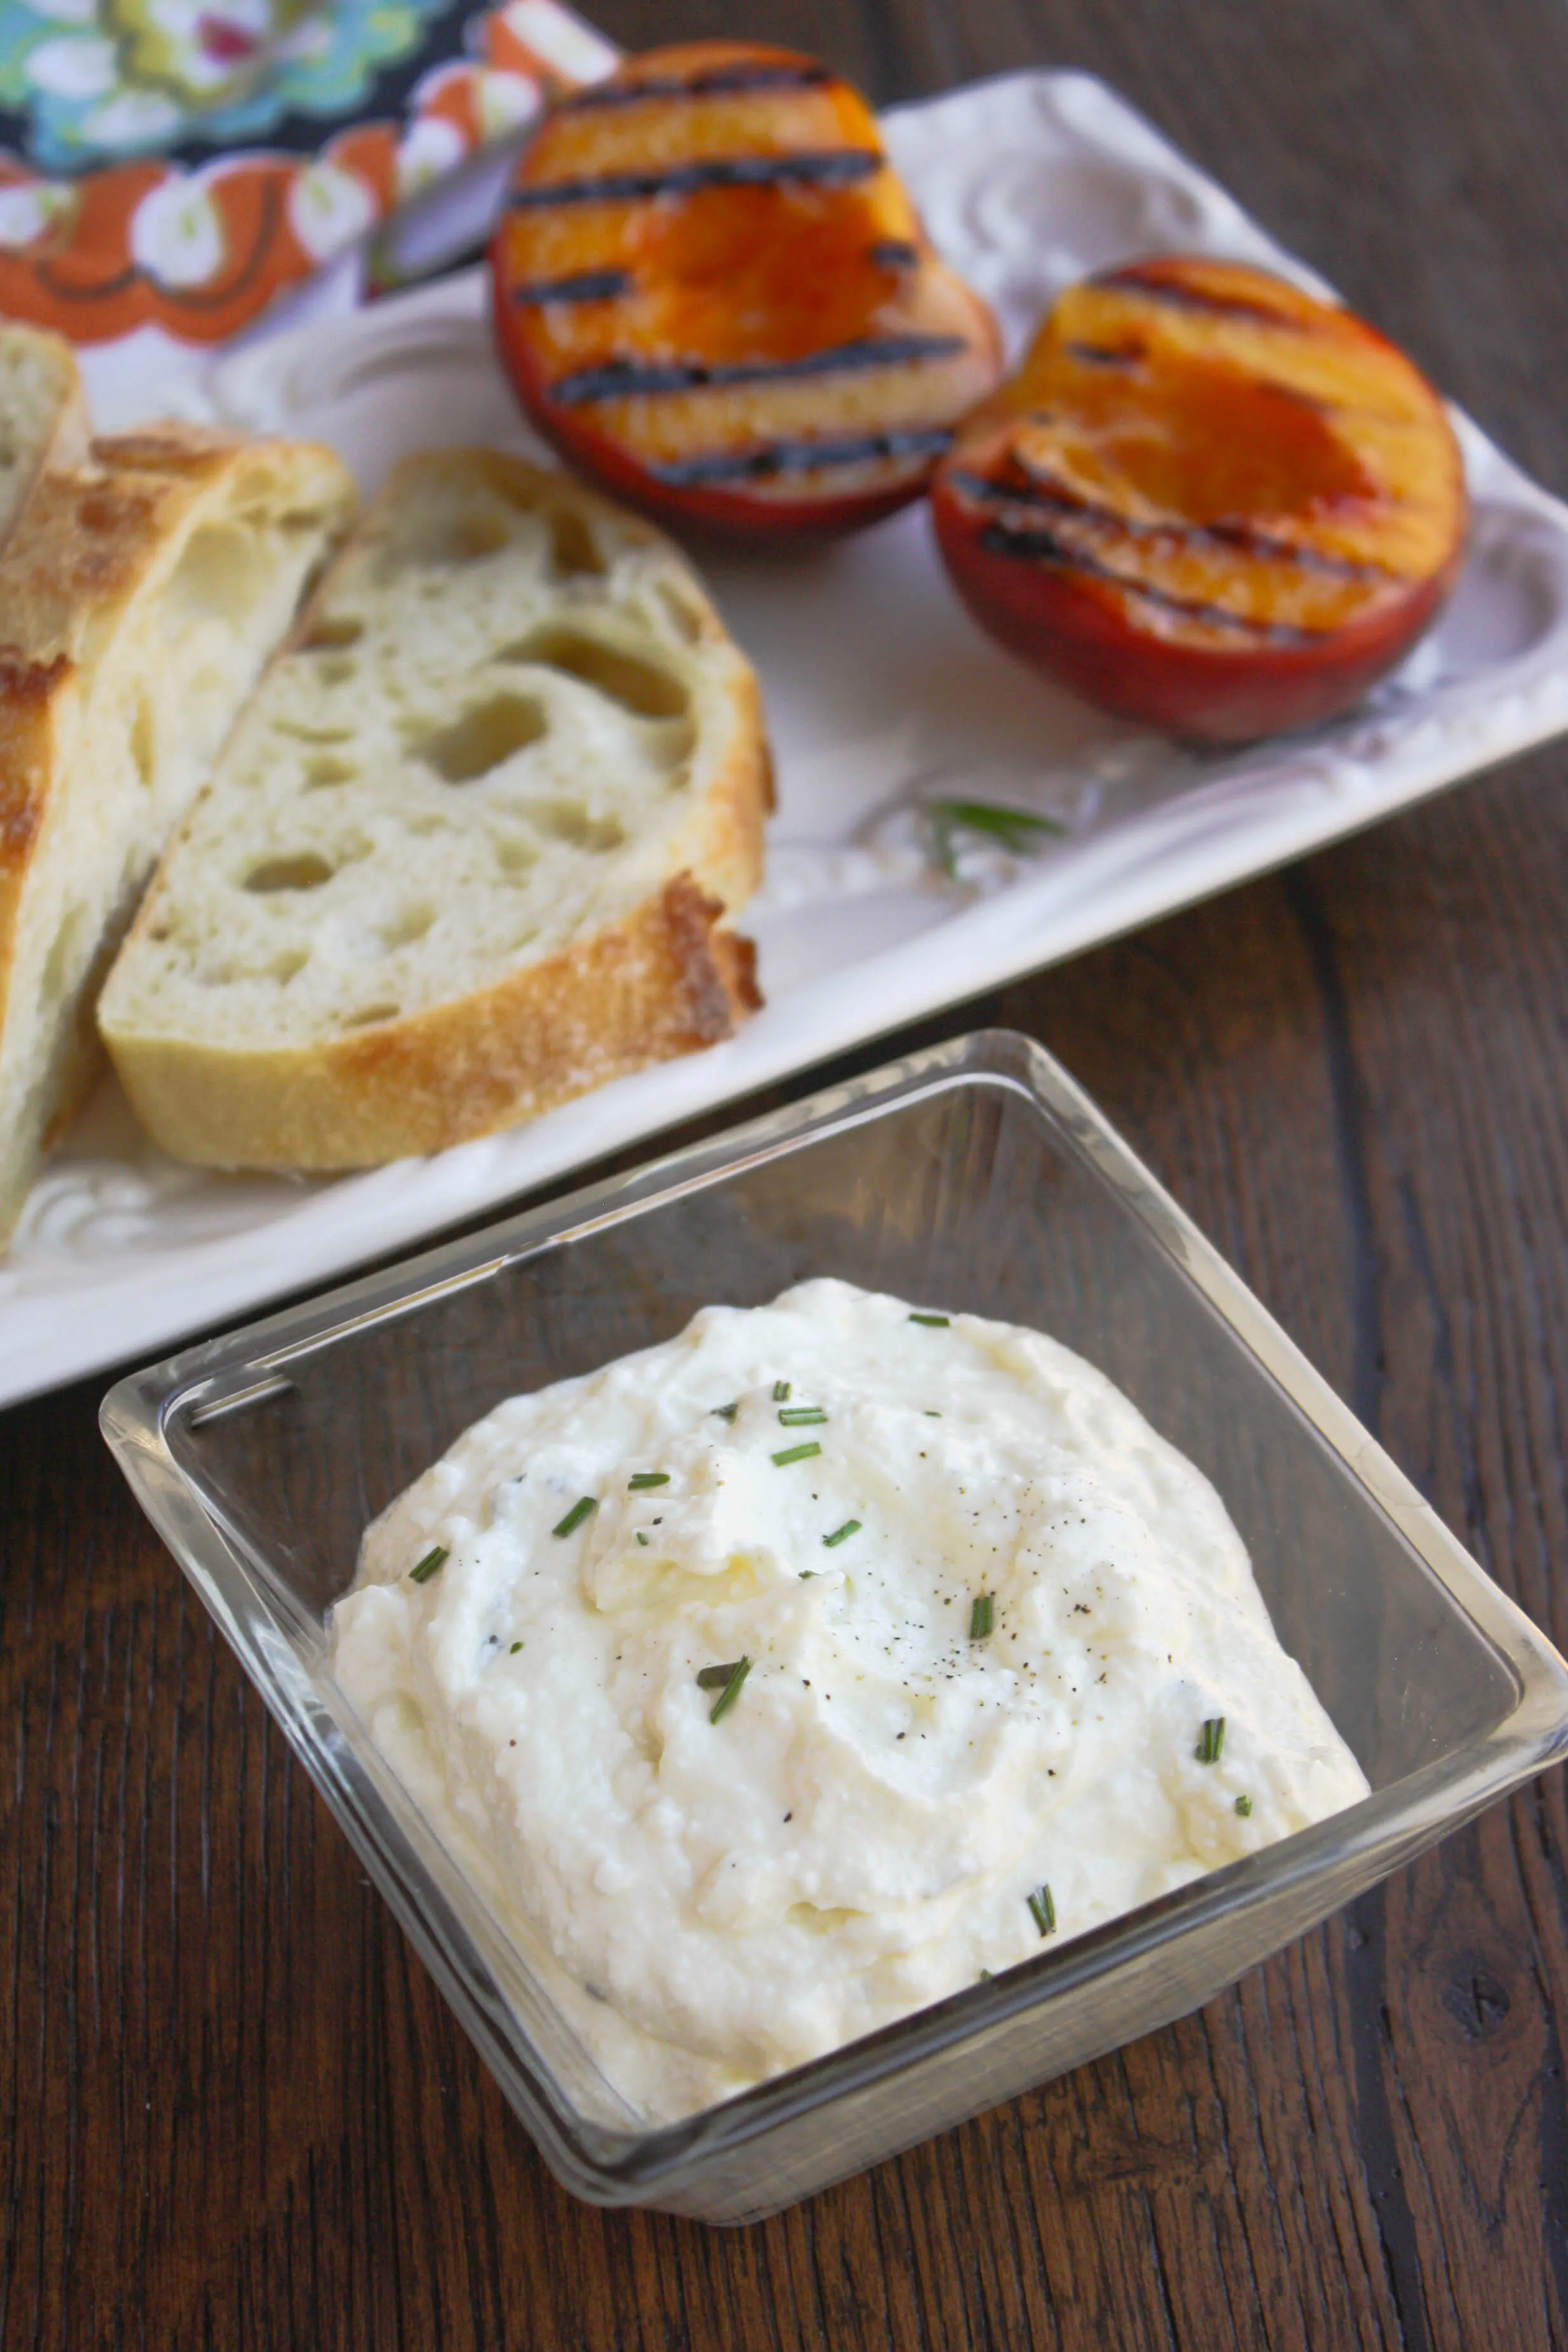 Rosemary Whipped Feta with Grilled Peaches and Honey makes a wonderful appetizer. This delicious cheese spread is party-perfect!